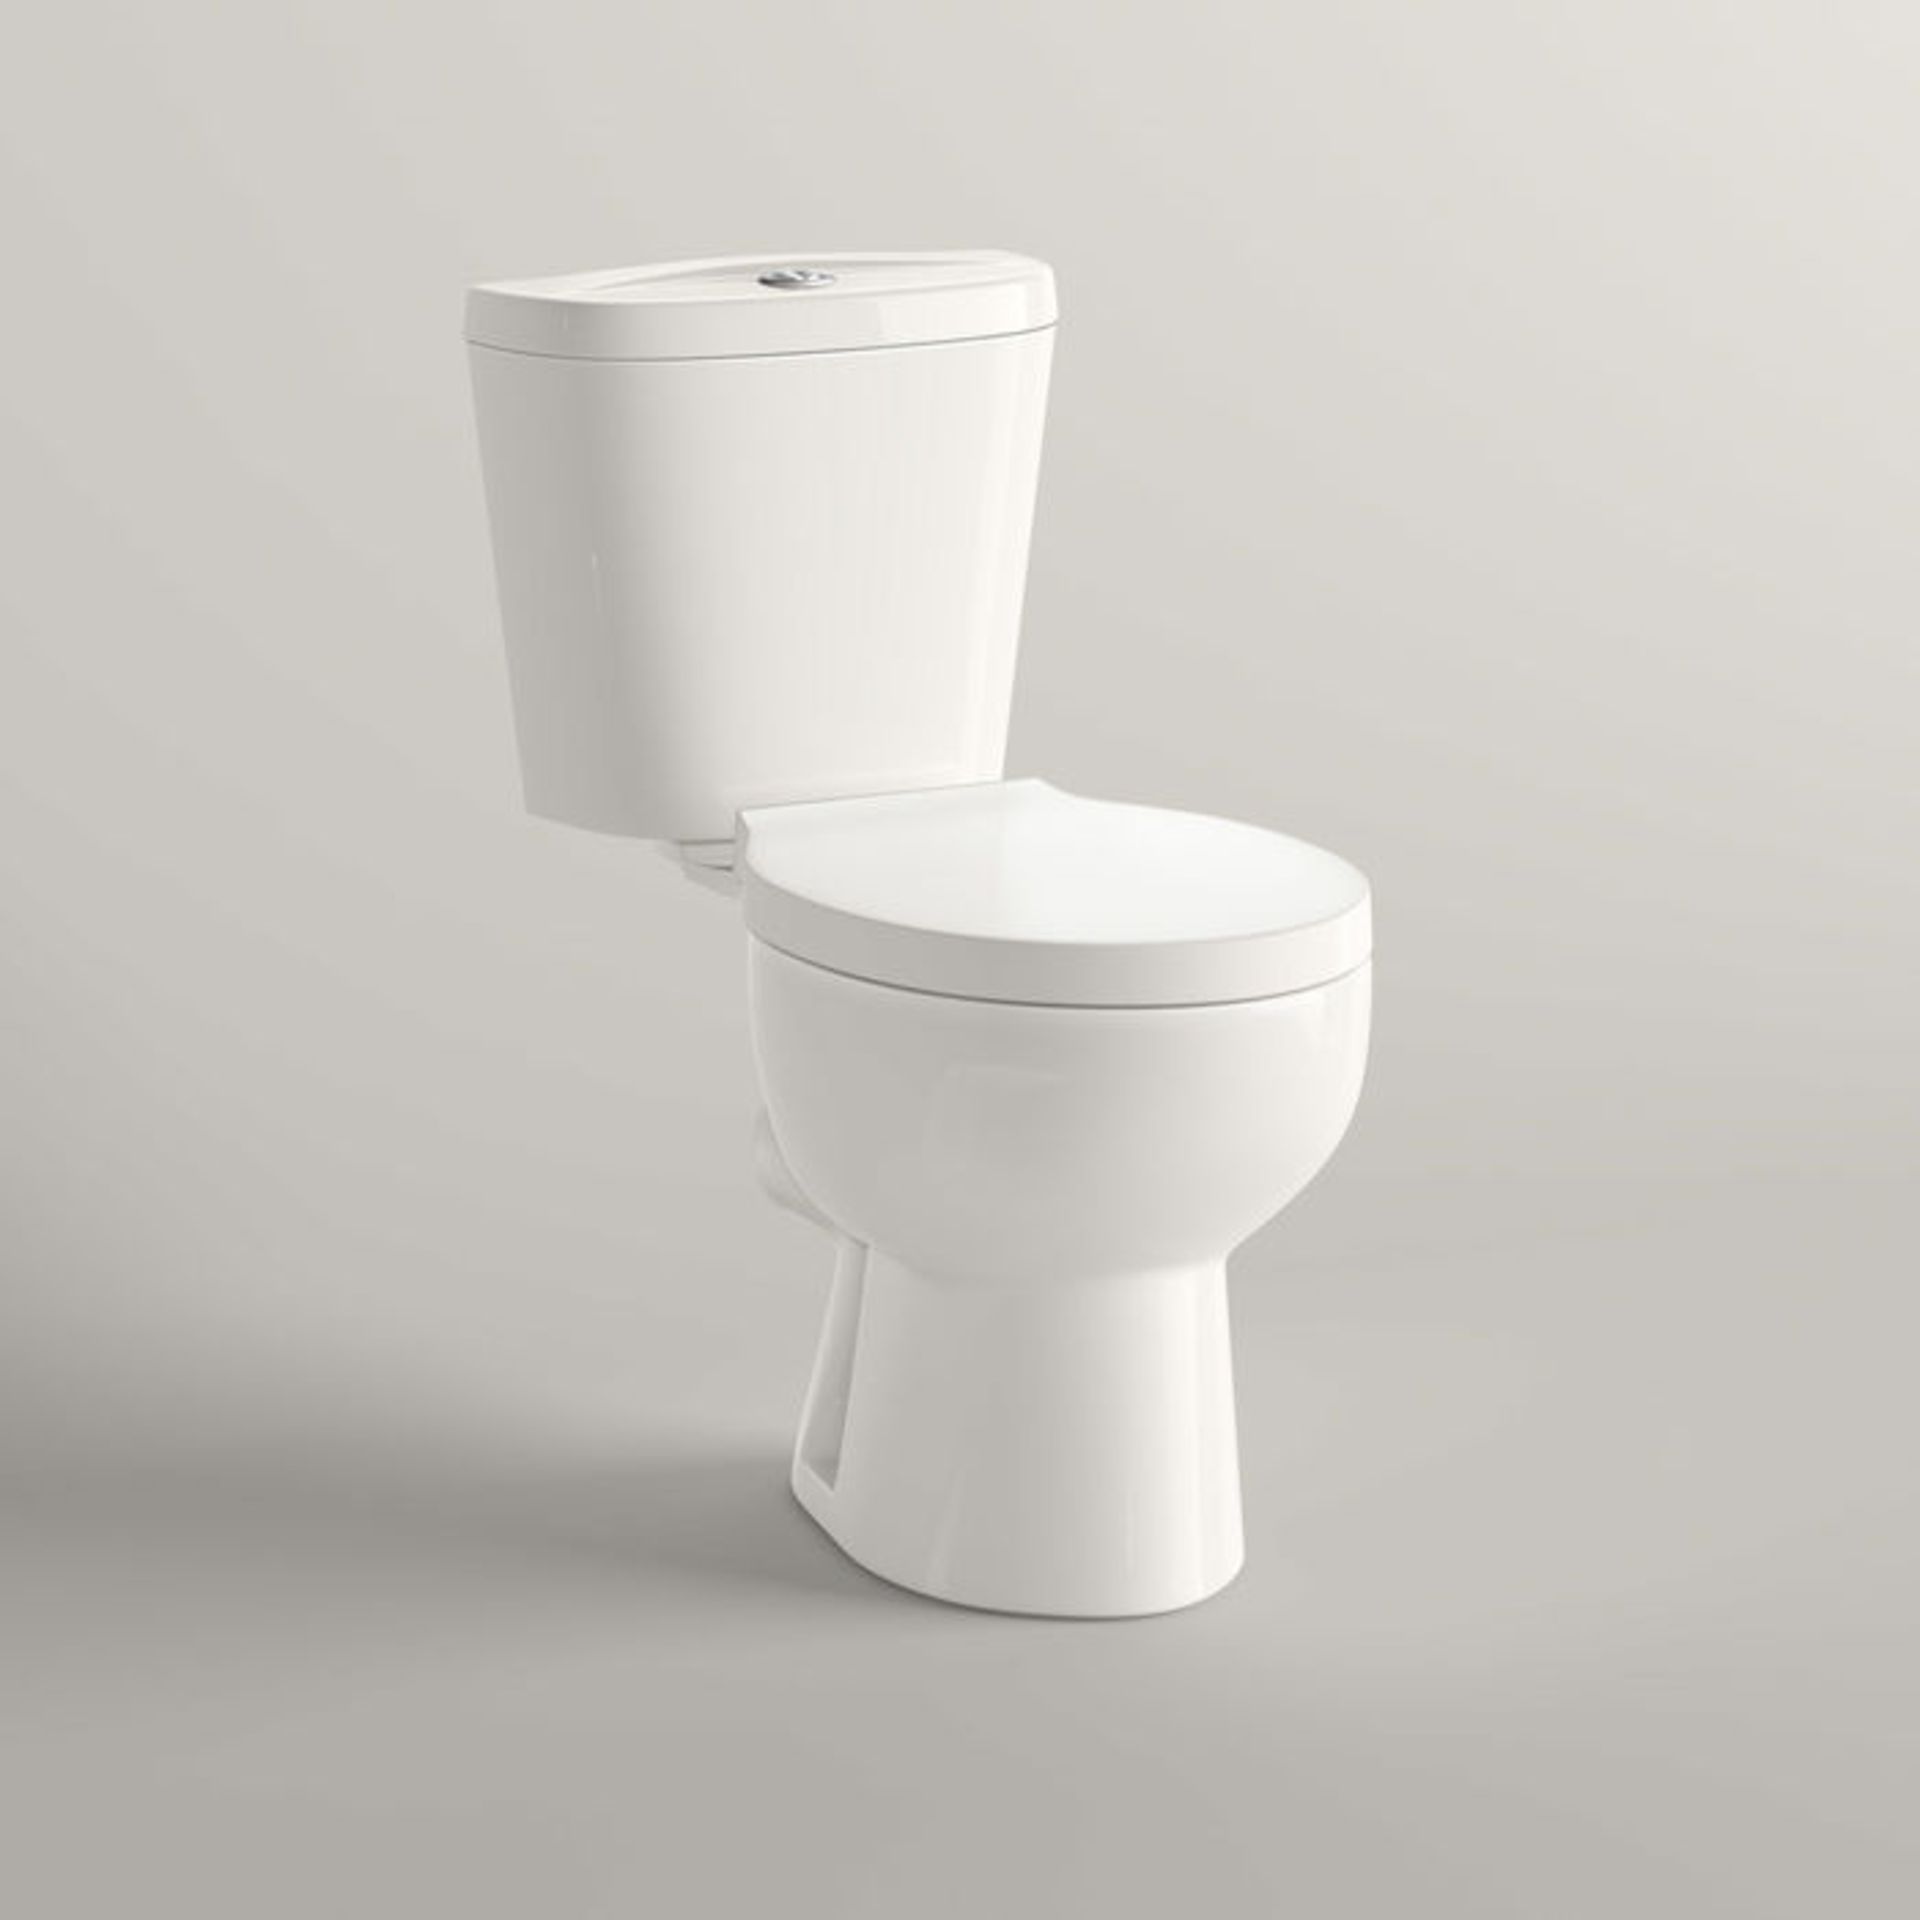 New Quartz Close Coupled Toilet.. We Love This Because It Is Simply Great Value! Made From Wh... - Image 2 of 3